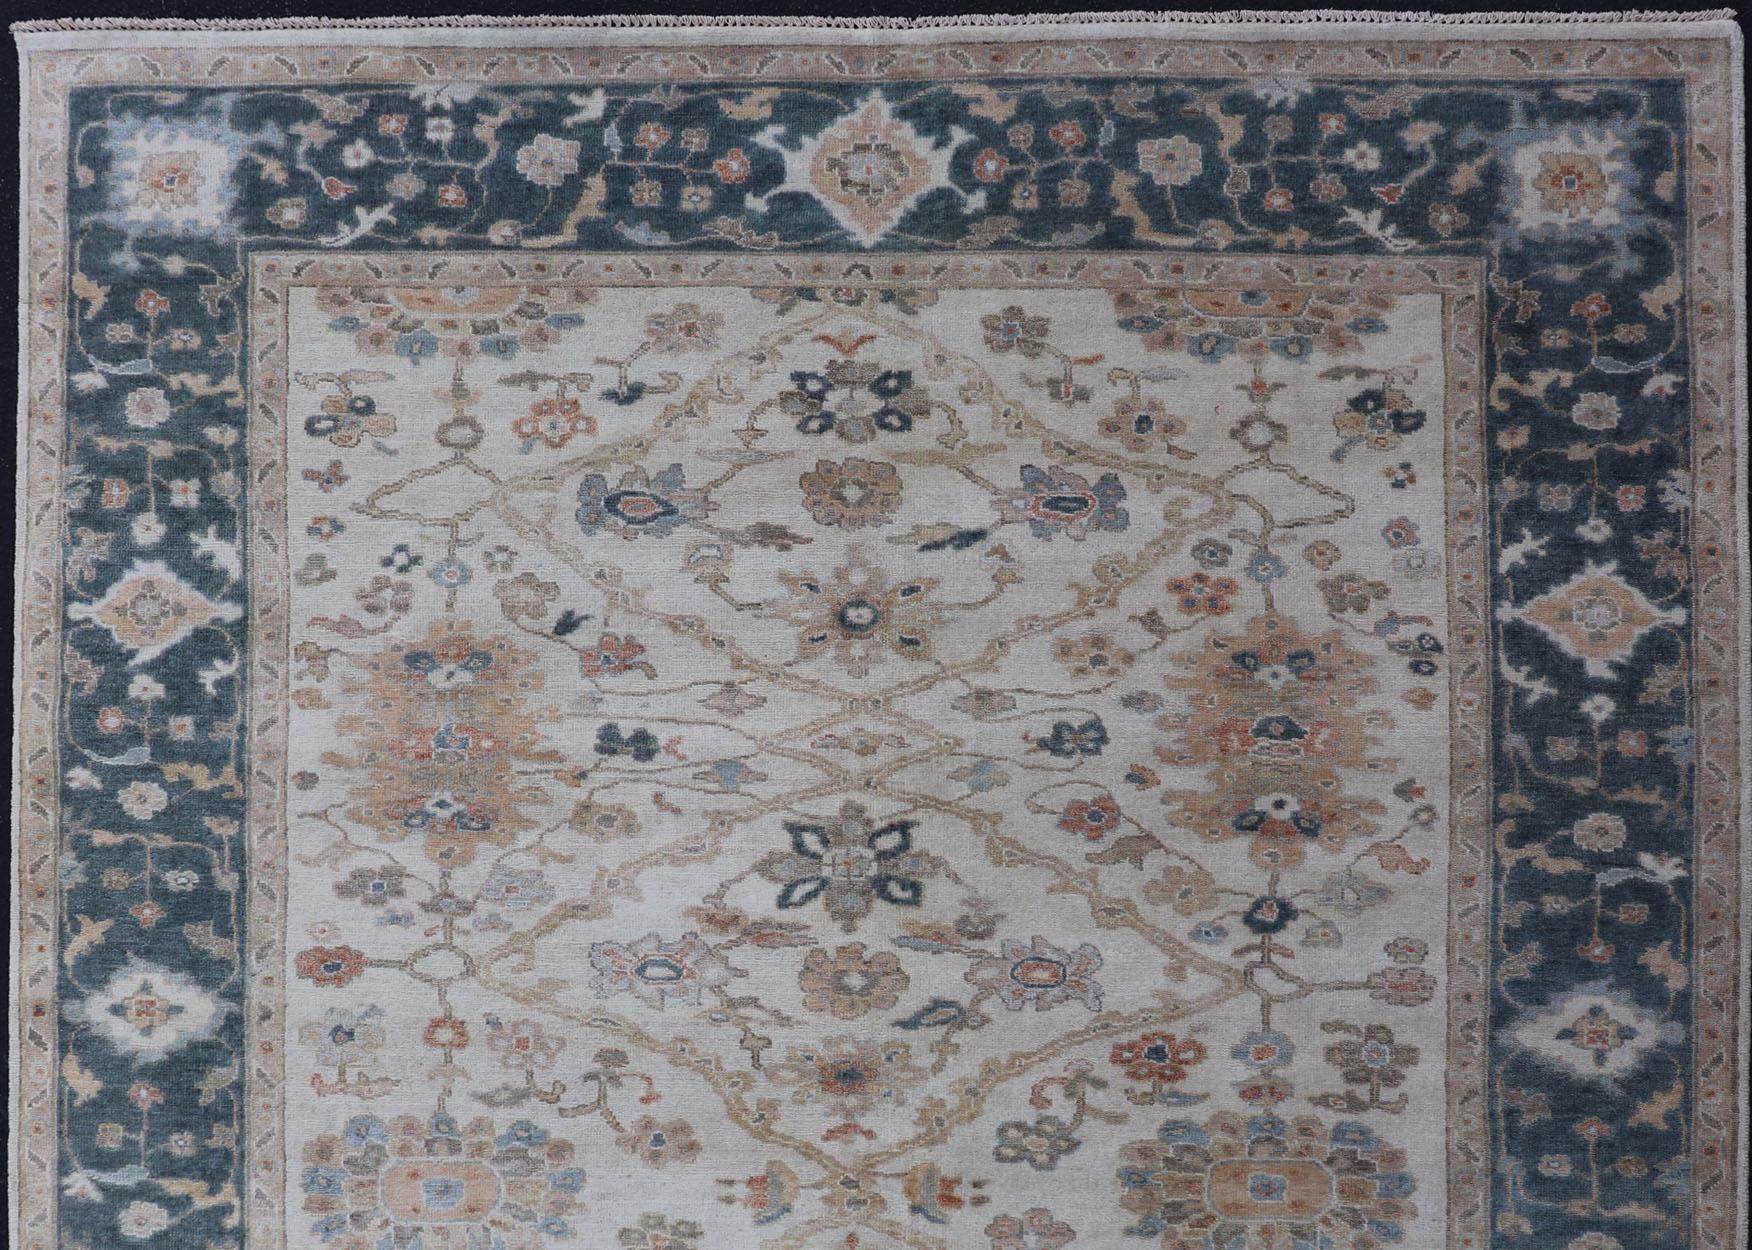 Oushak Design Rug by Keivan Woven Arts in Teal Blue, Cream and Multi Colors In Excellent Condition For Sale In Atlanta, GA